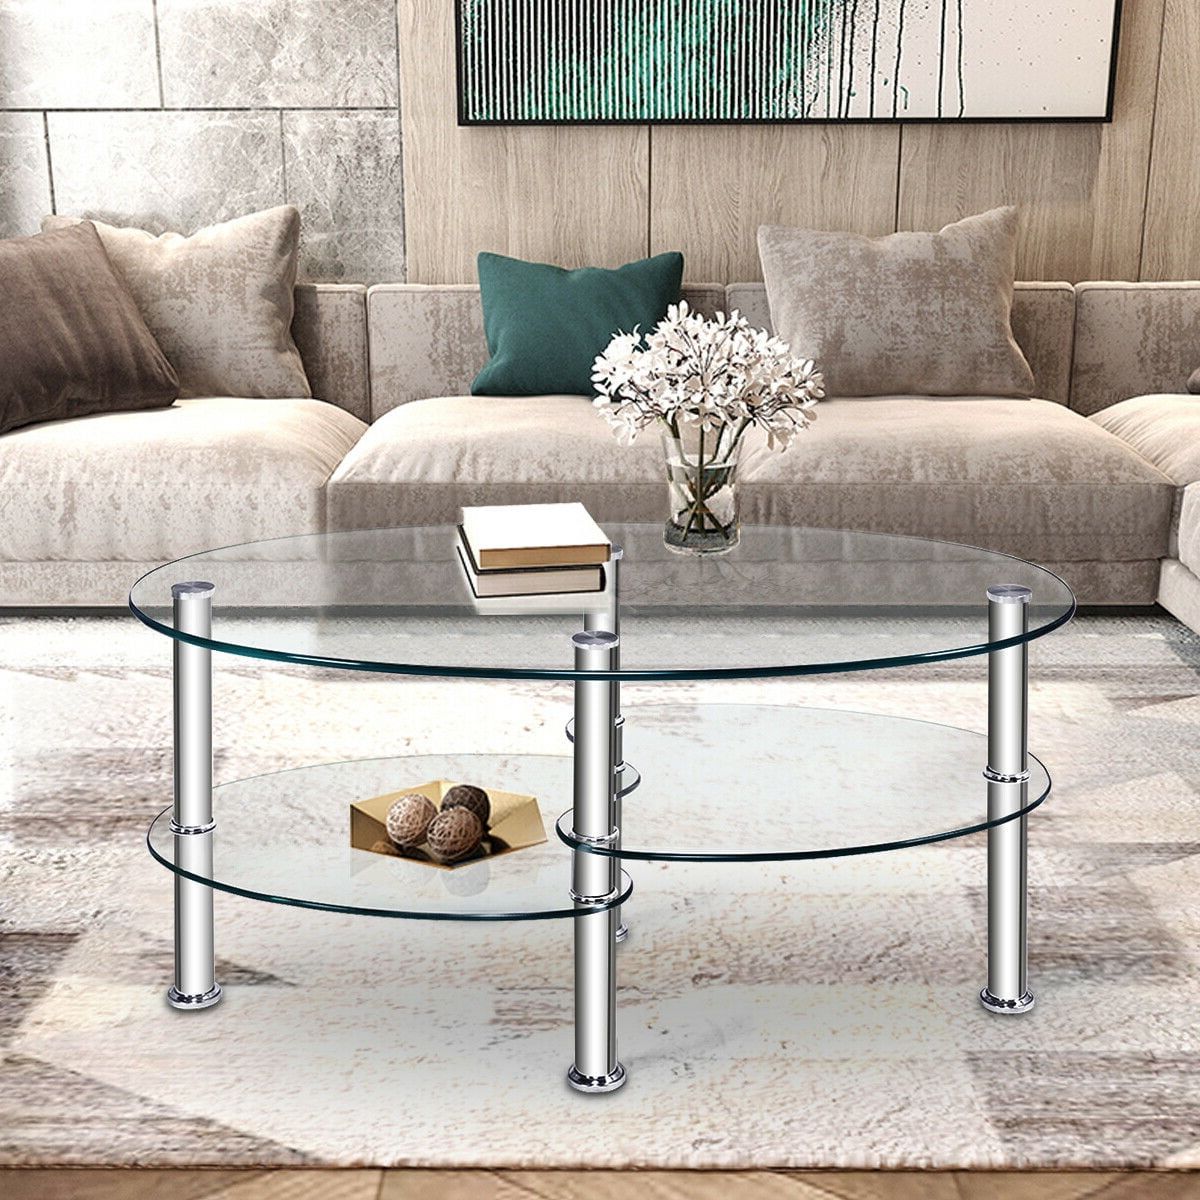 Tempered Glass Coffee Tables Intended For 2019 Costway Tempered Glass Oval Side Coffee Table Shelf Chrome Base Living (View 5 of 15)